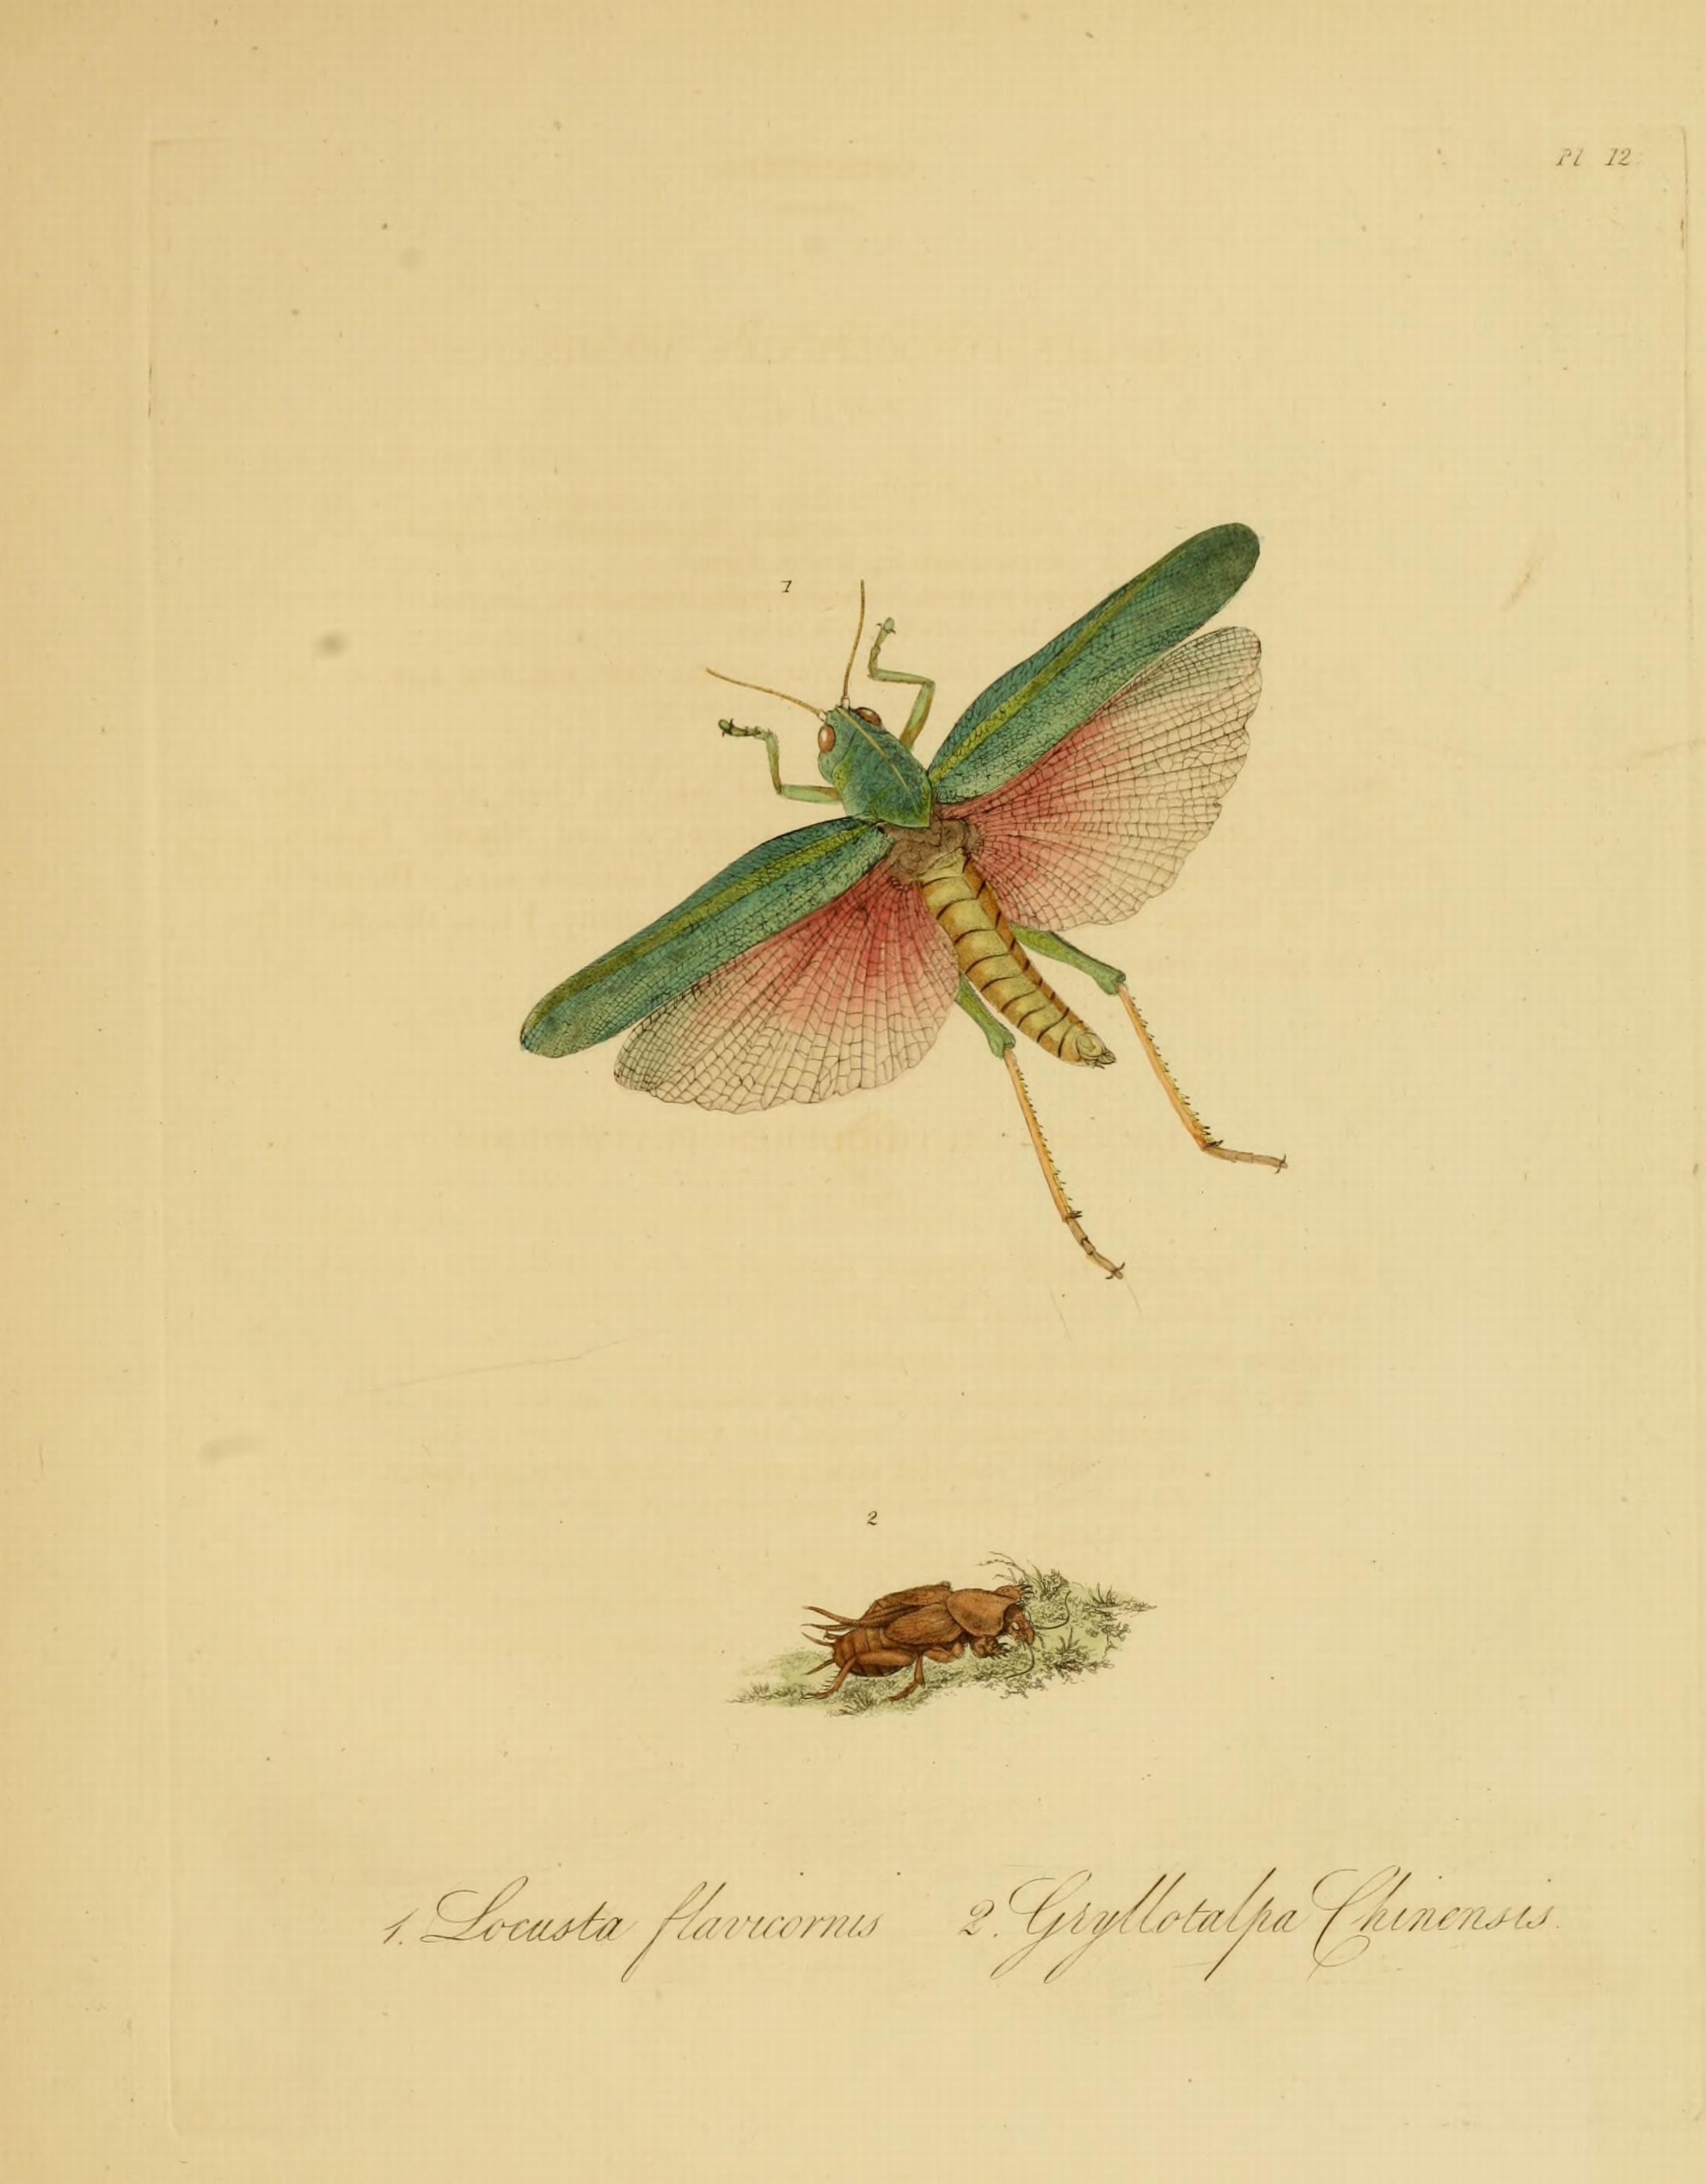 Donovan - Insects of China, 1838 - pl 12